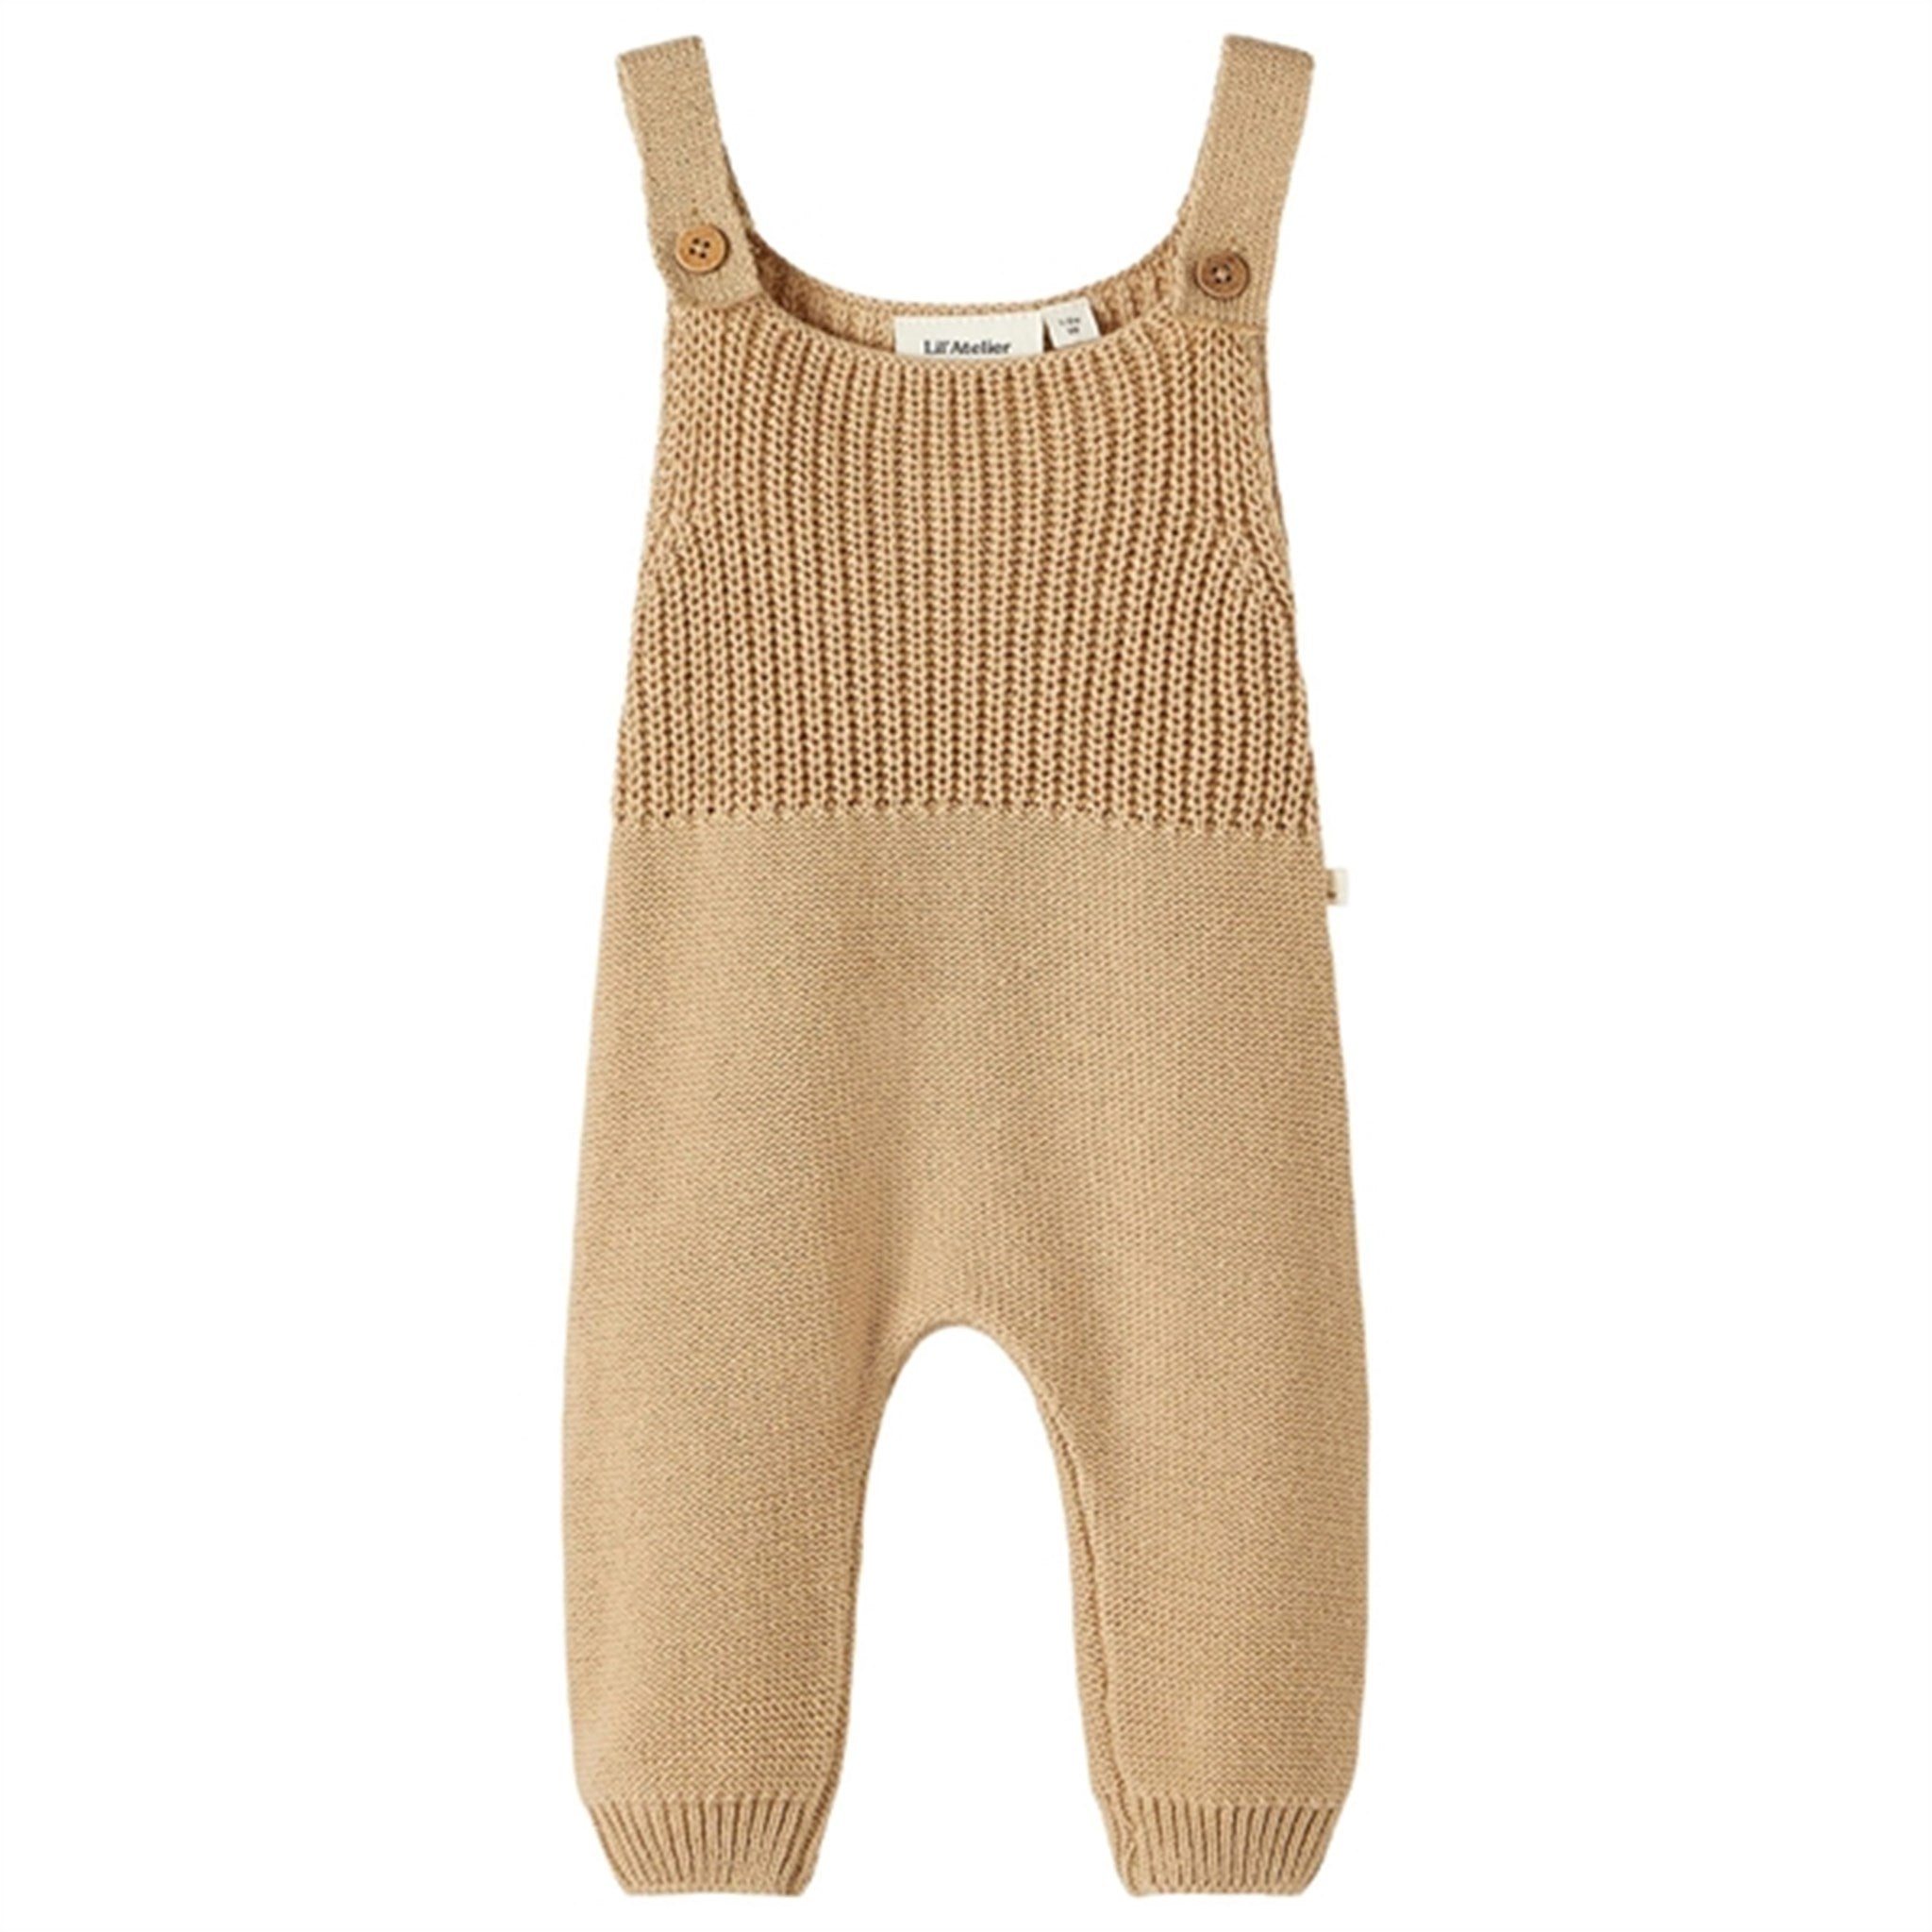 Lil' Atelier Curds & Whey Laguno Loose Stickat Overall